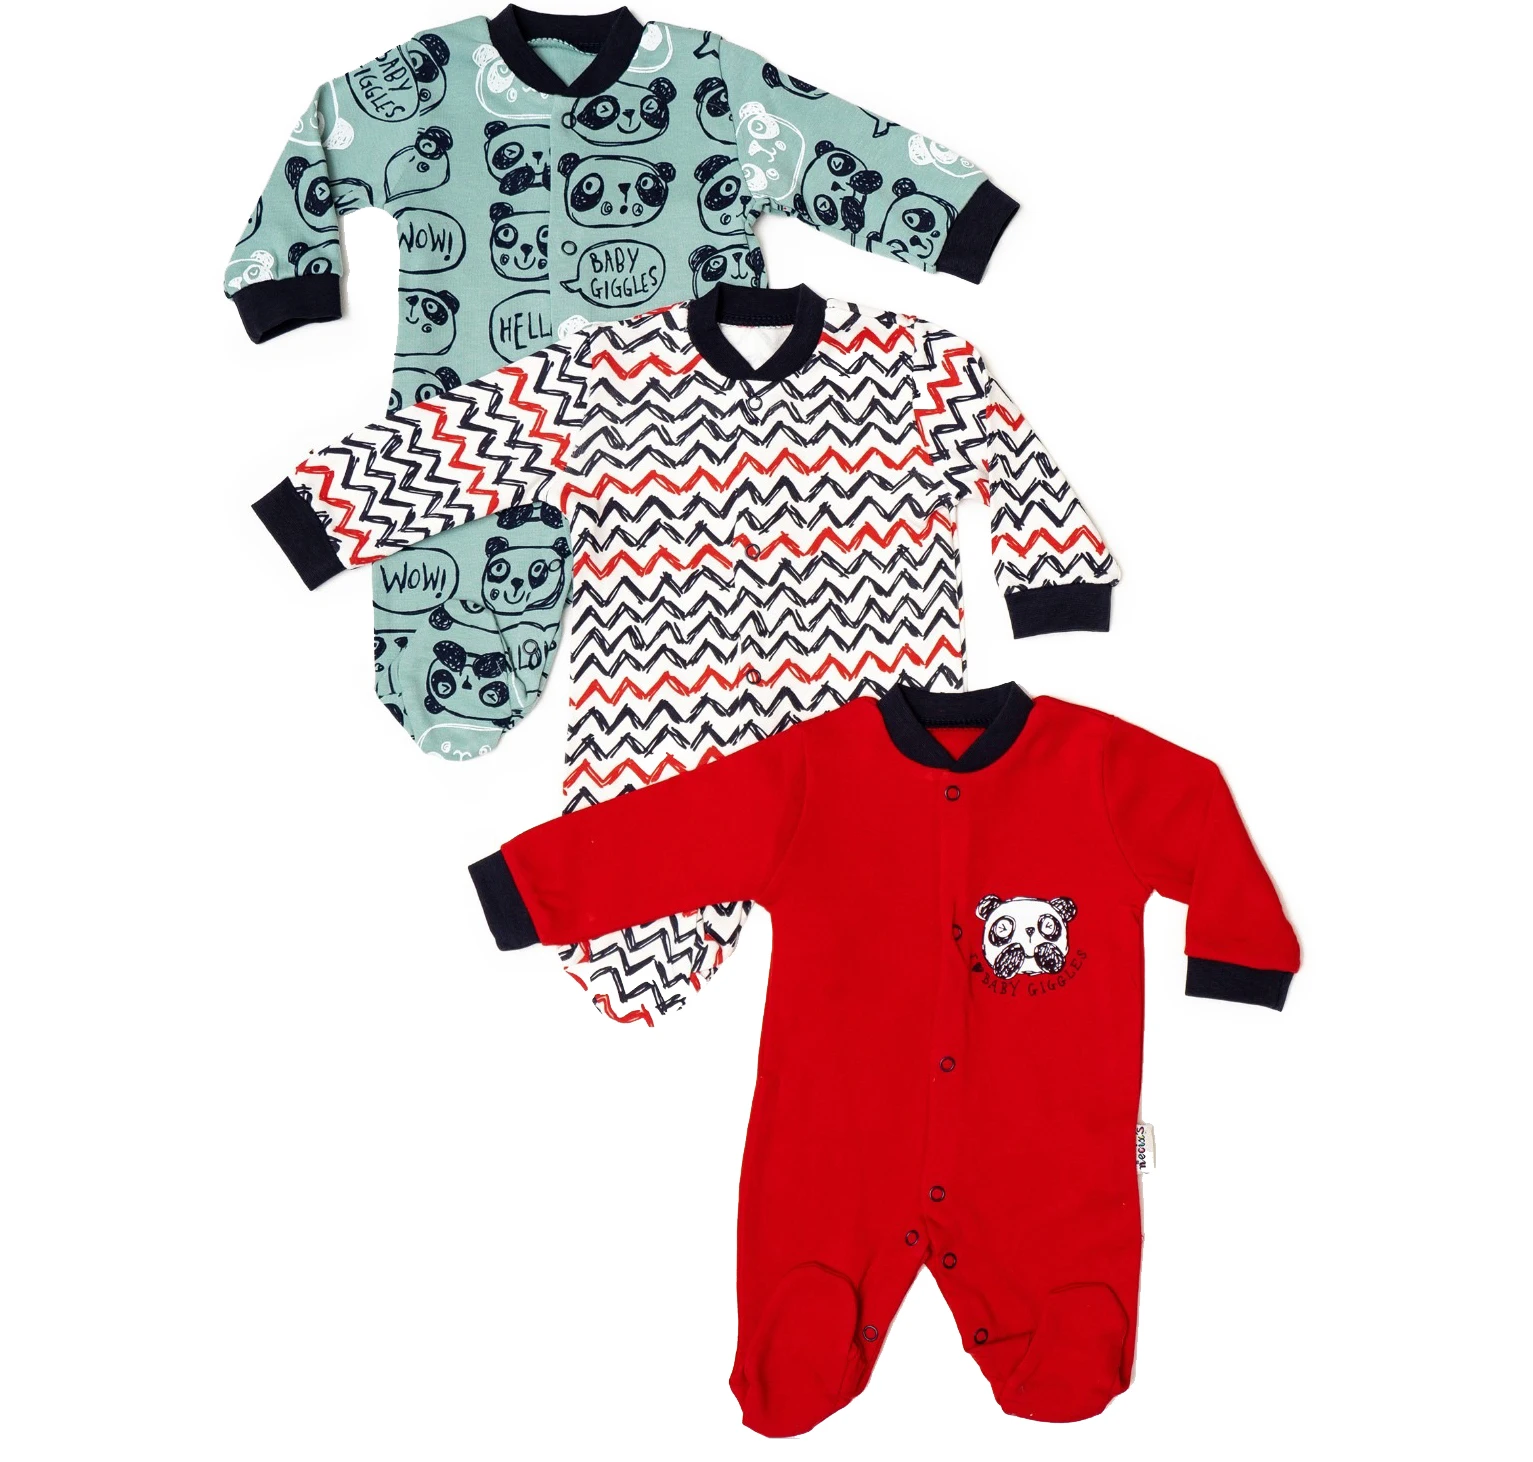 Hot Sale ! Baby Panda One Size Baby Boy Rompers Soft Cotton Baby Clothes By Necix's Brand